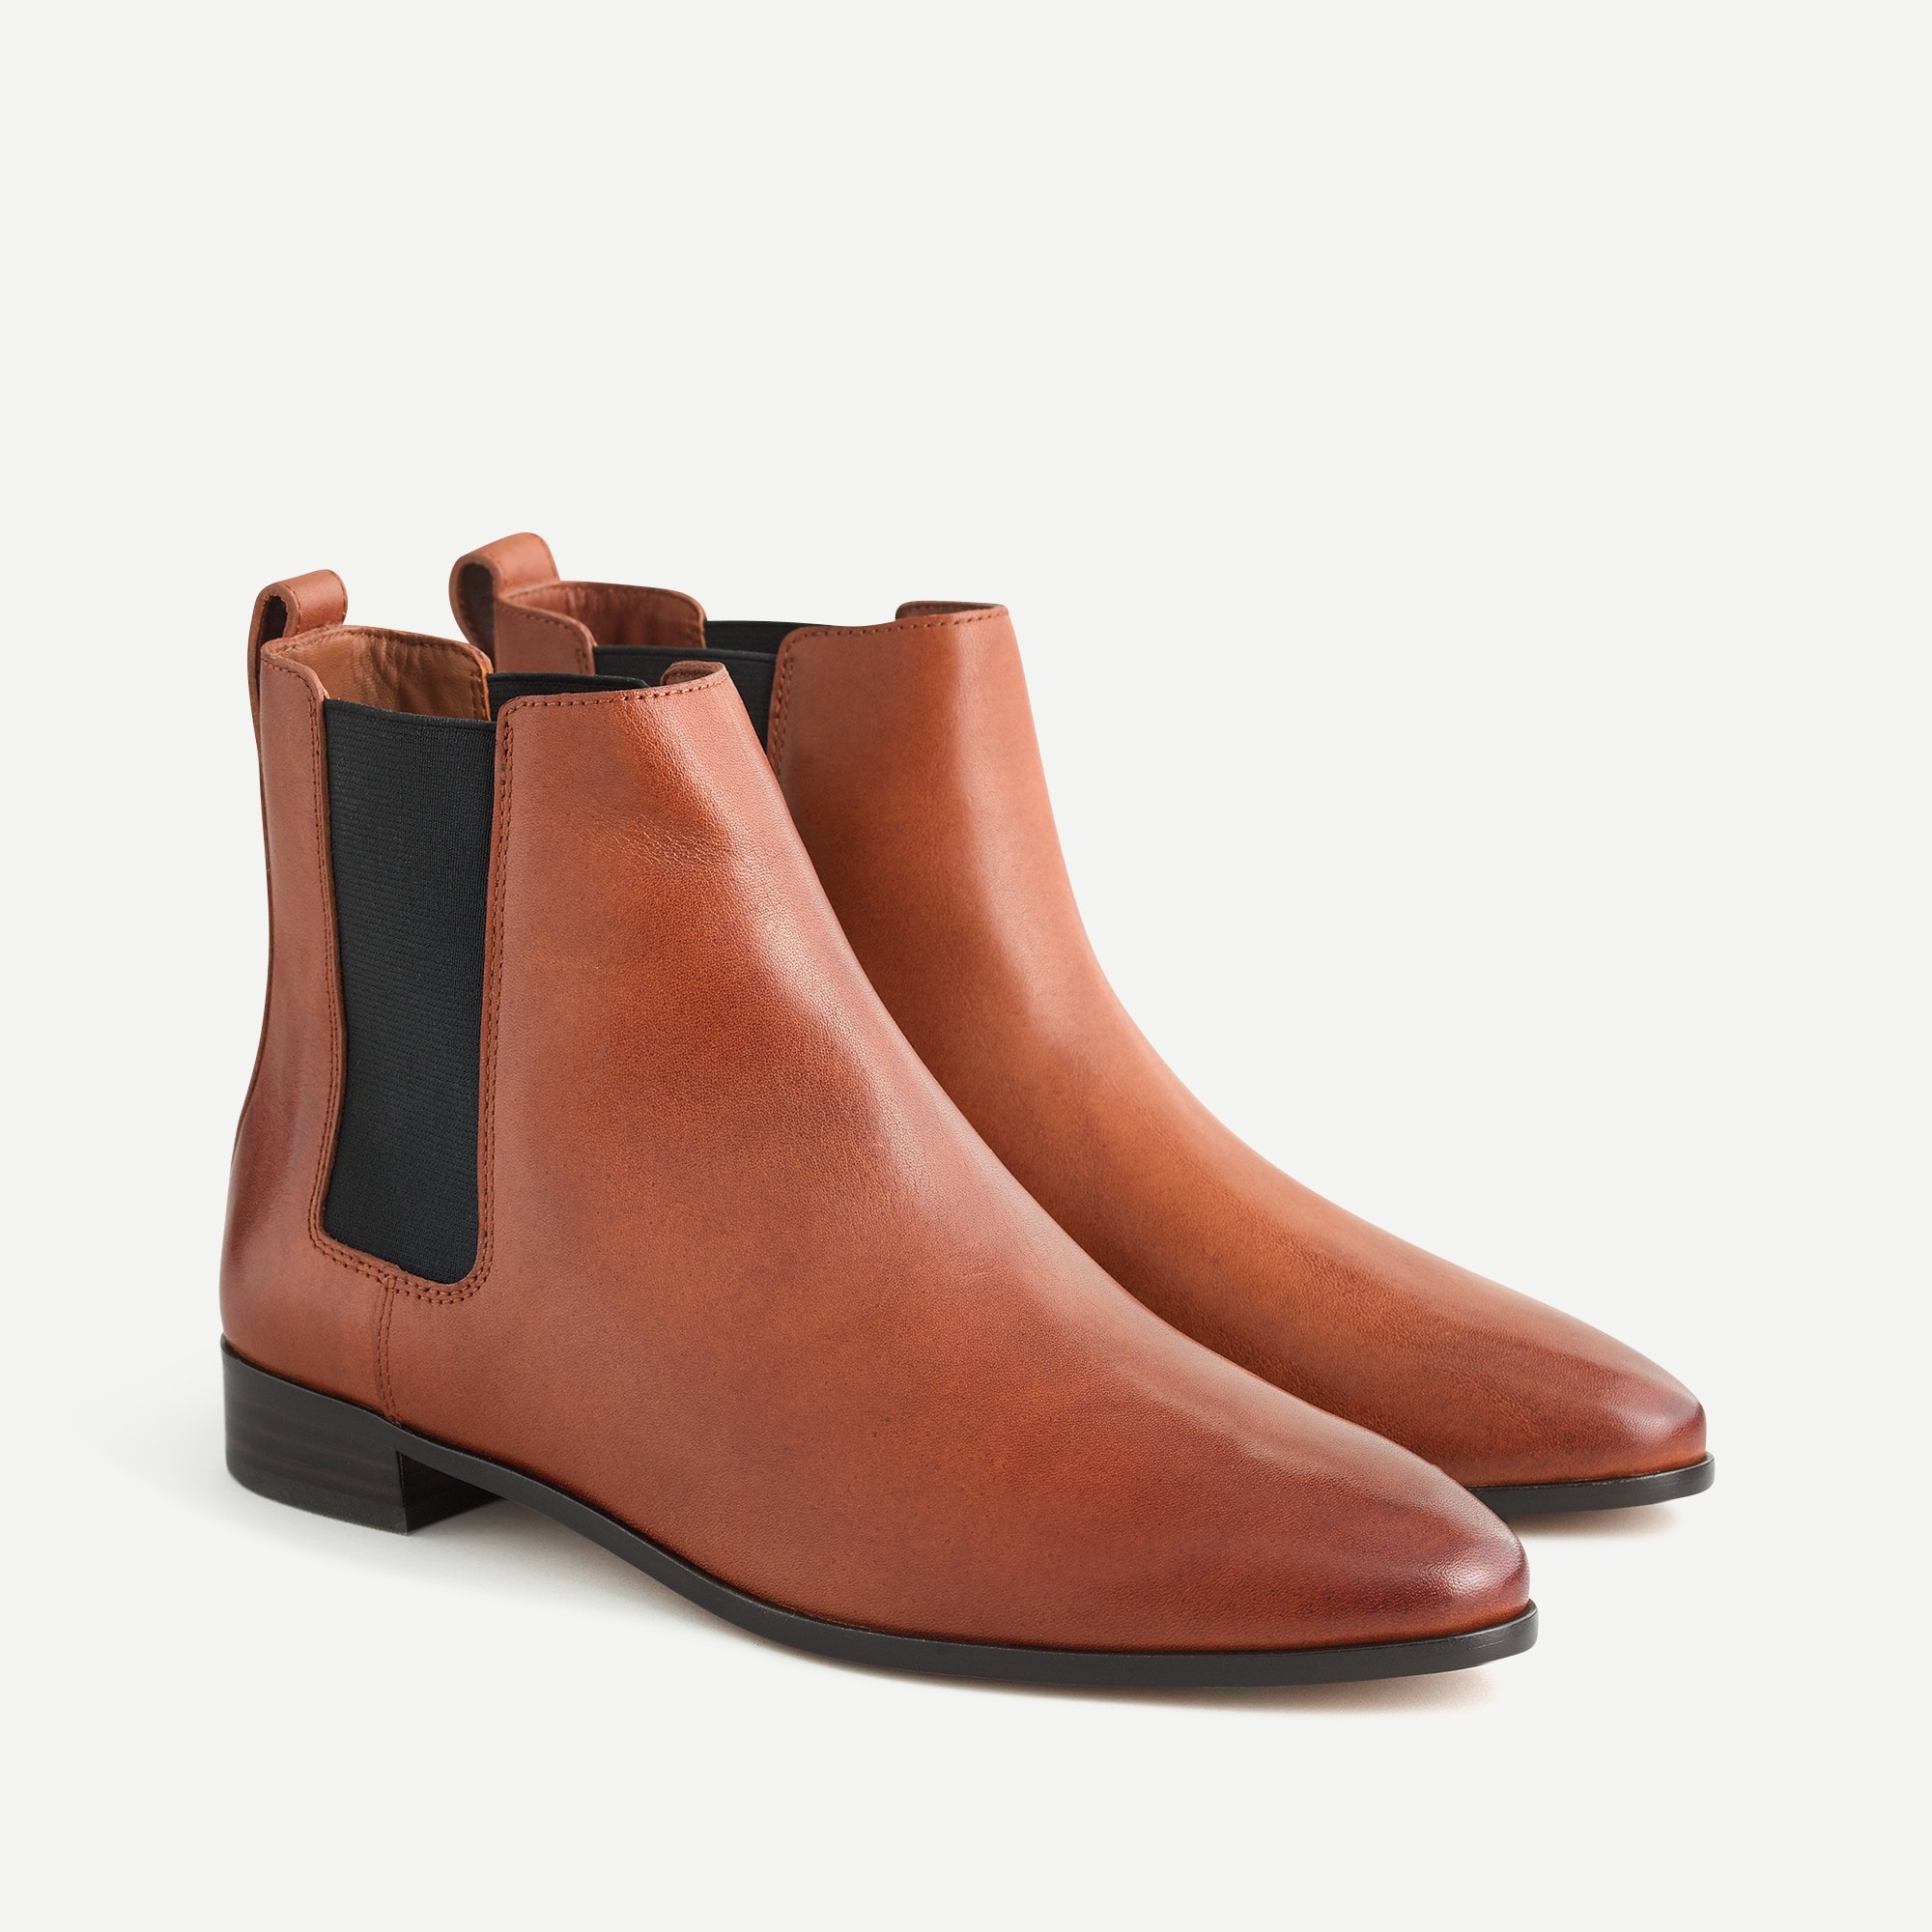 leather tan chelsea boots womens